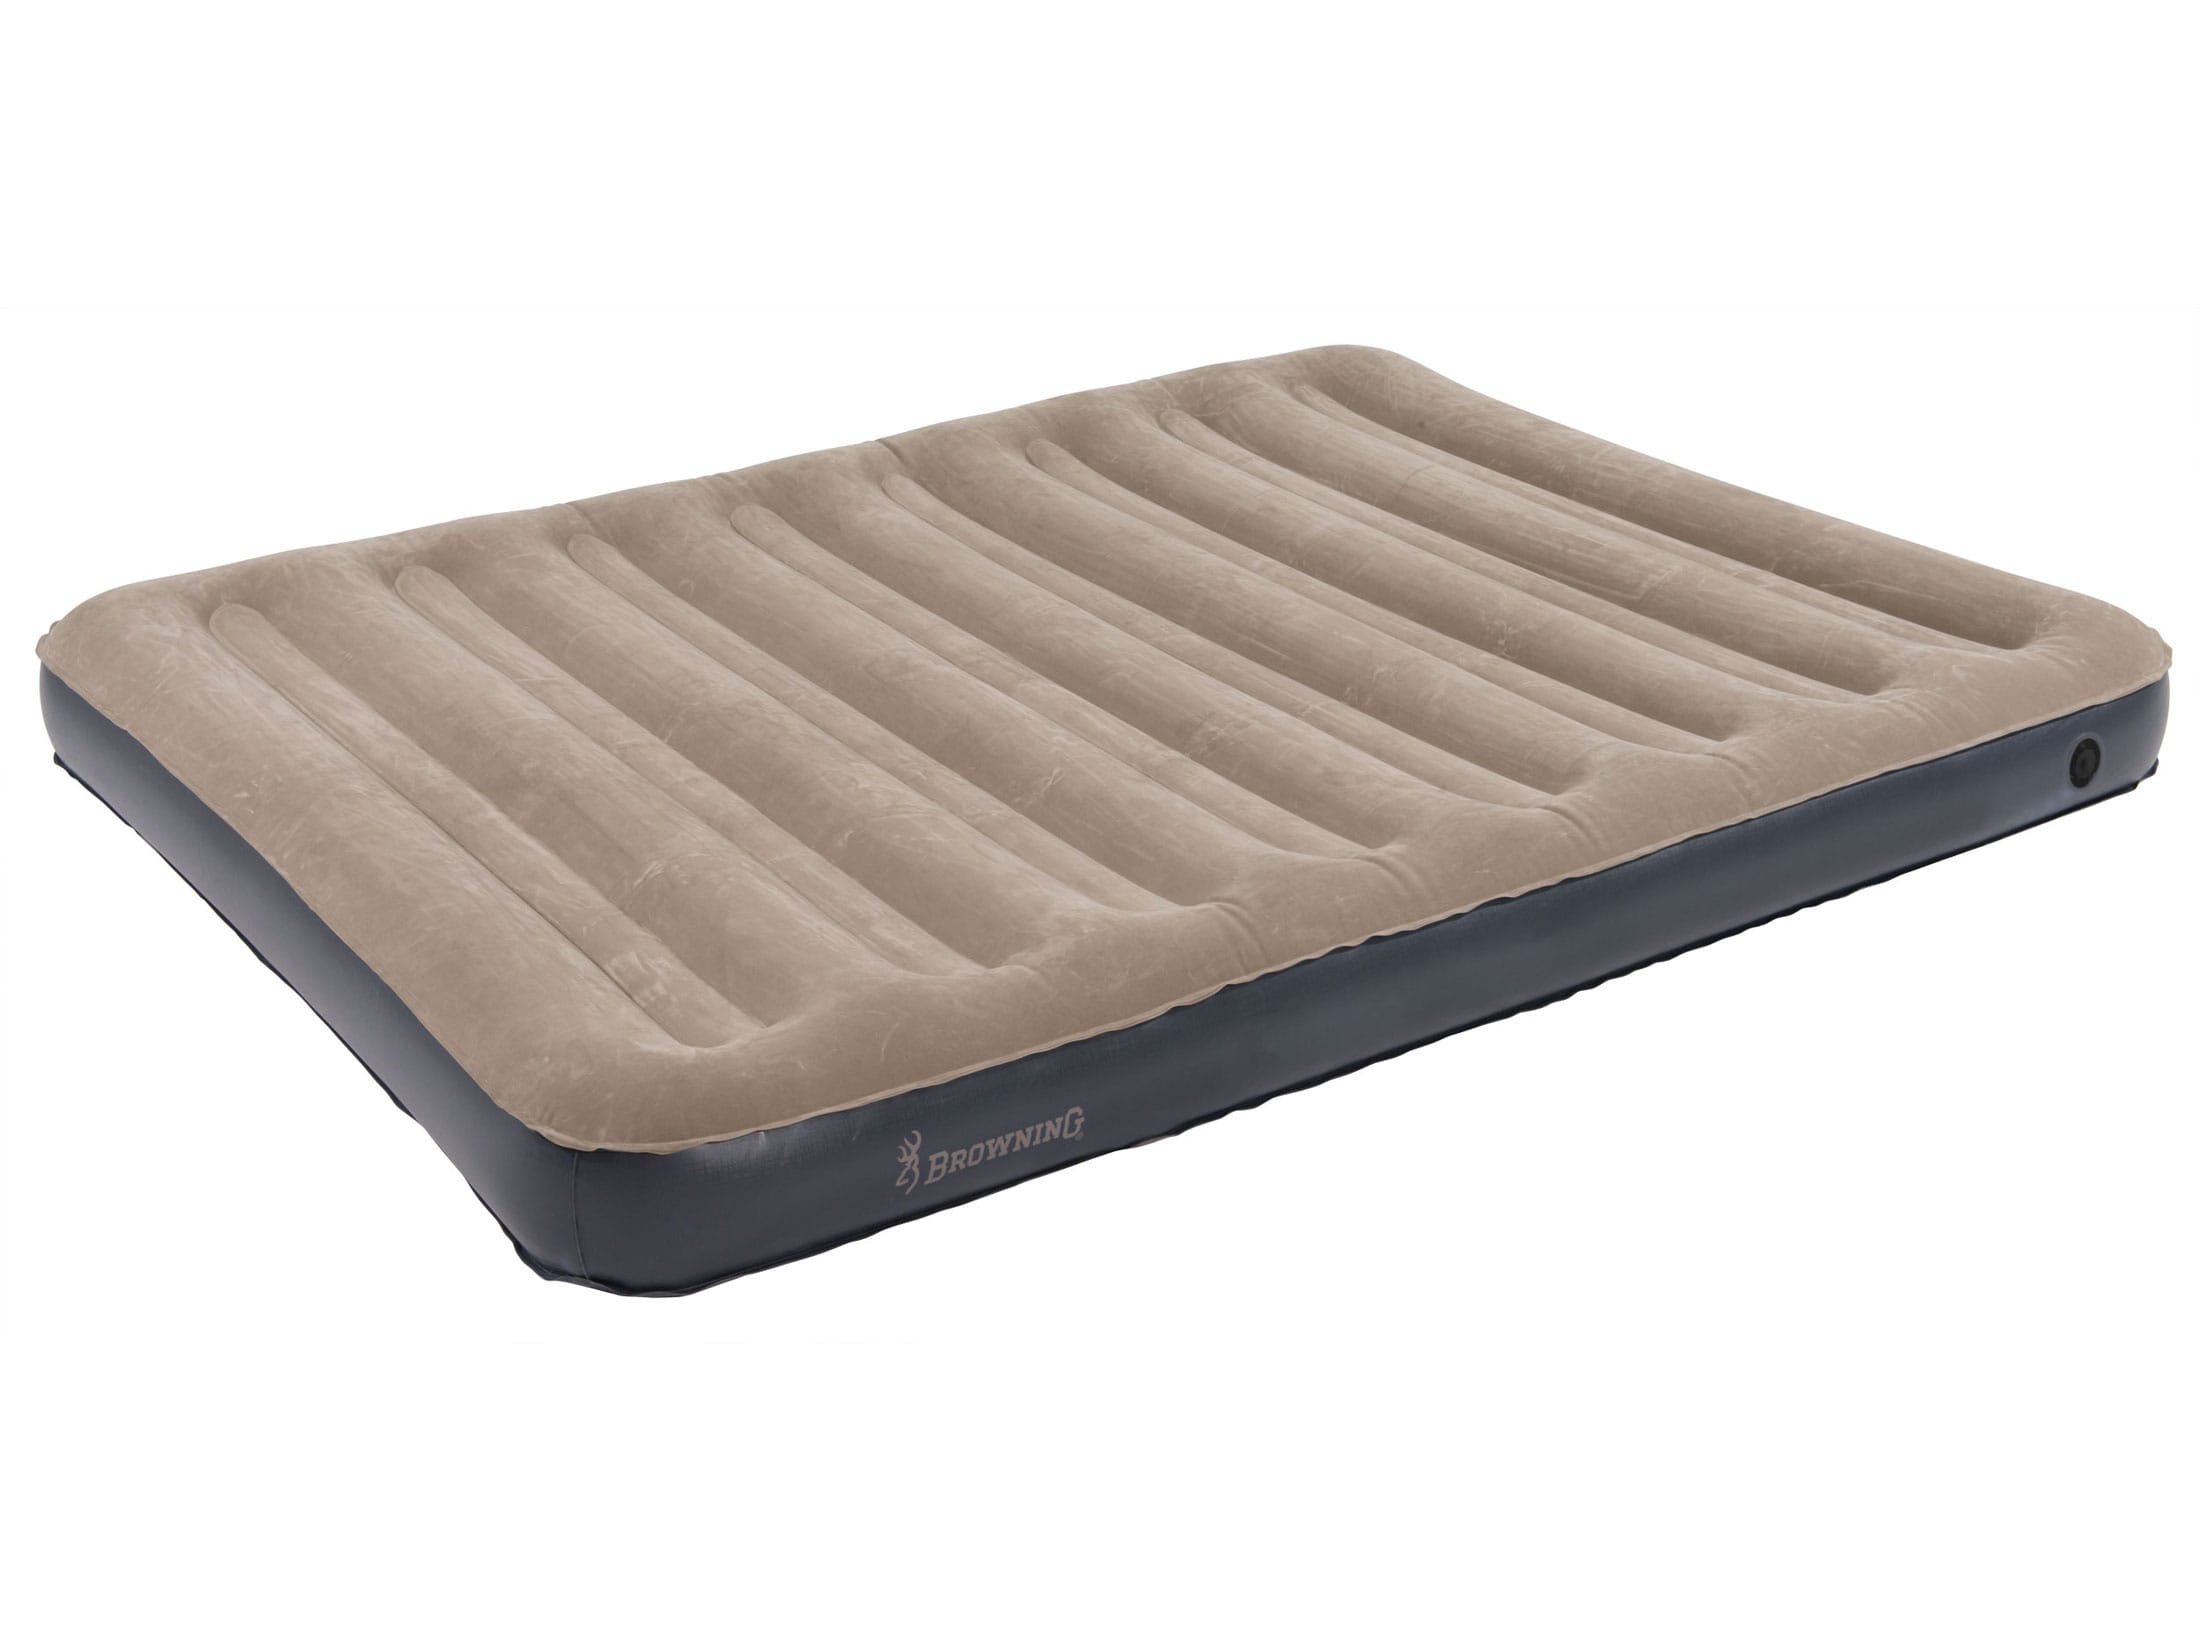 Best 51+ Impressive browning 4d airbed air mattress Top Choices Of Architects